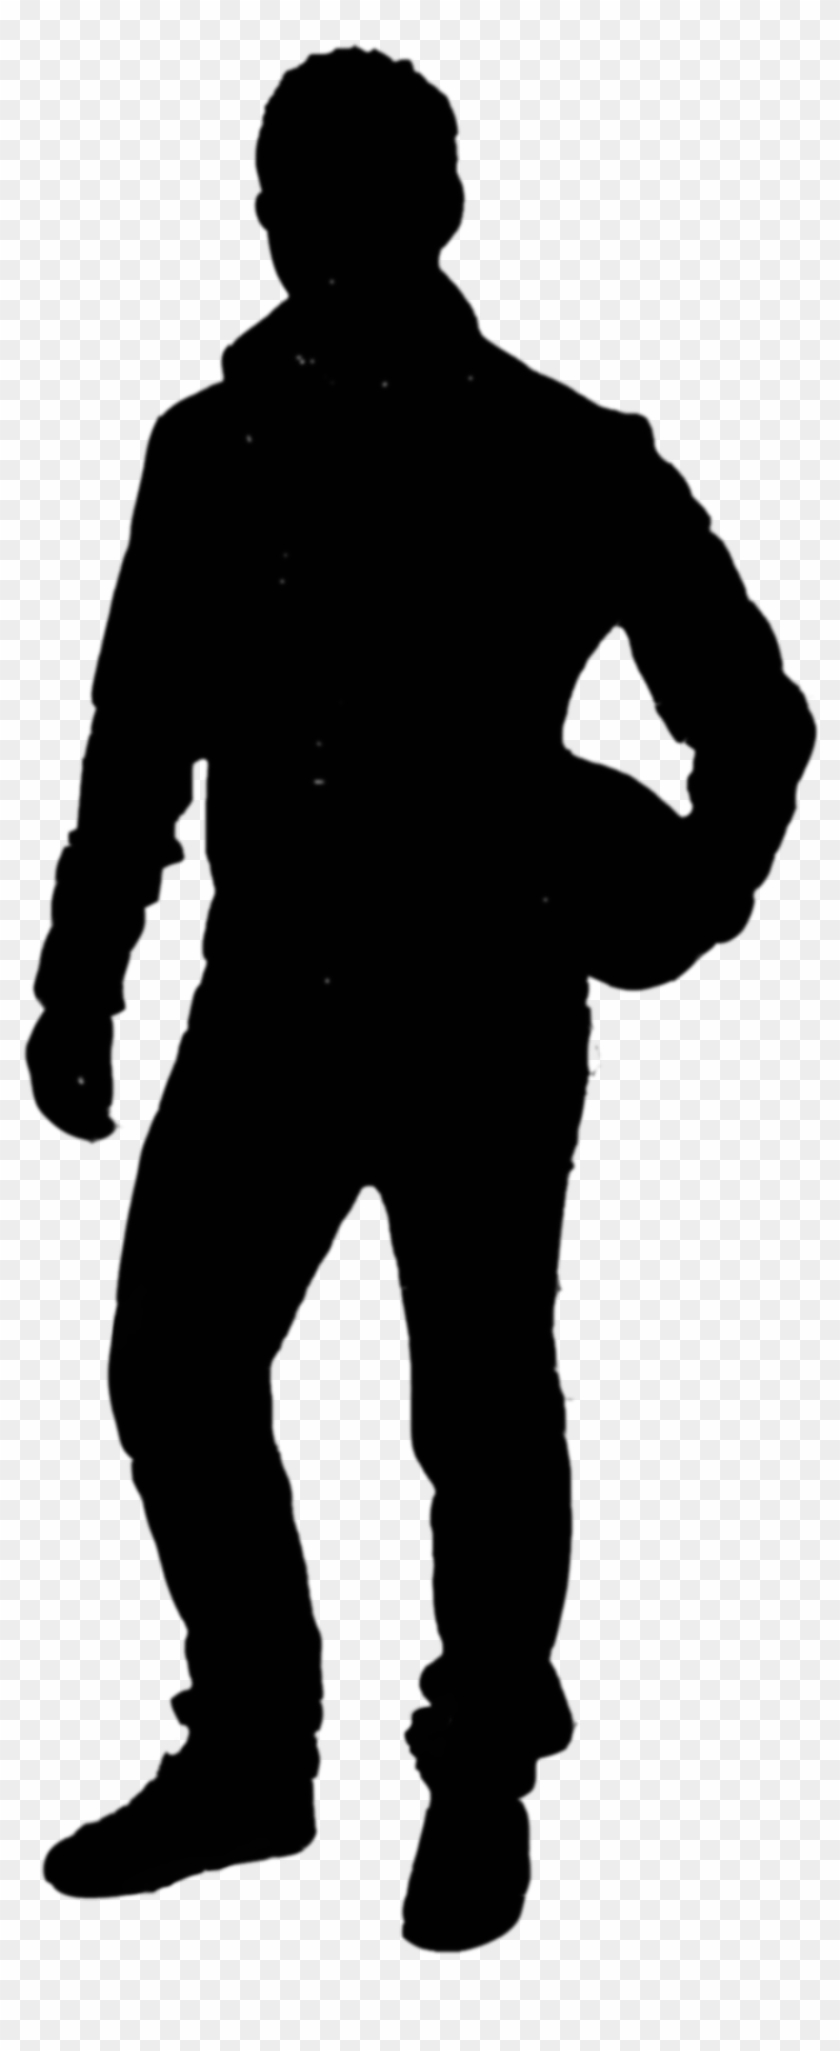 Motorcycle Guy Silhouette Clipart - Silhouette Of Teddy Roosevelt #1012114